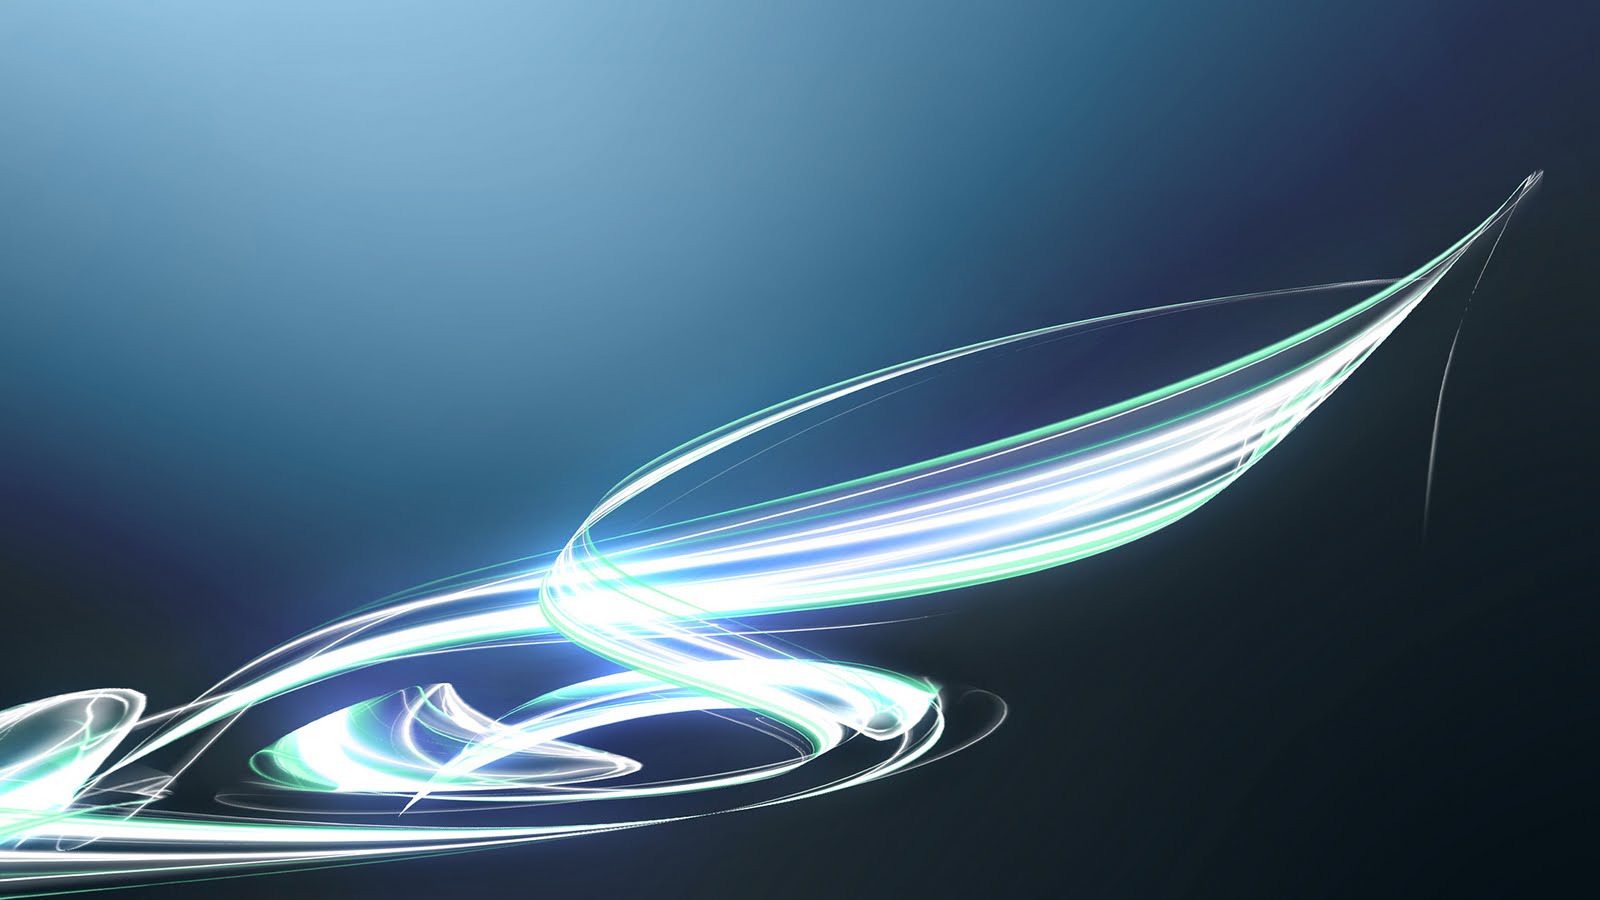 High Res Awesome Laser Wallpapers #741540 Pic